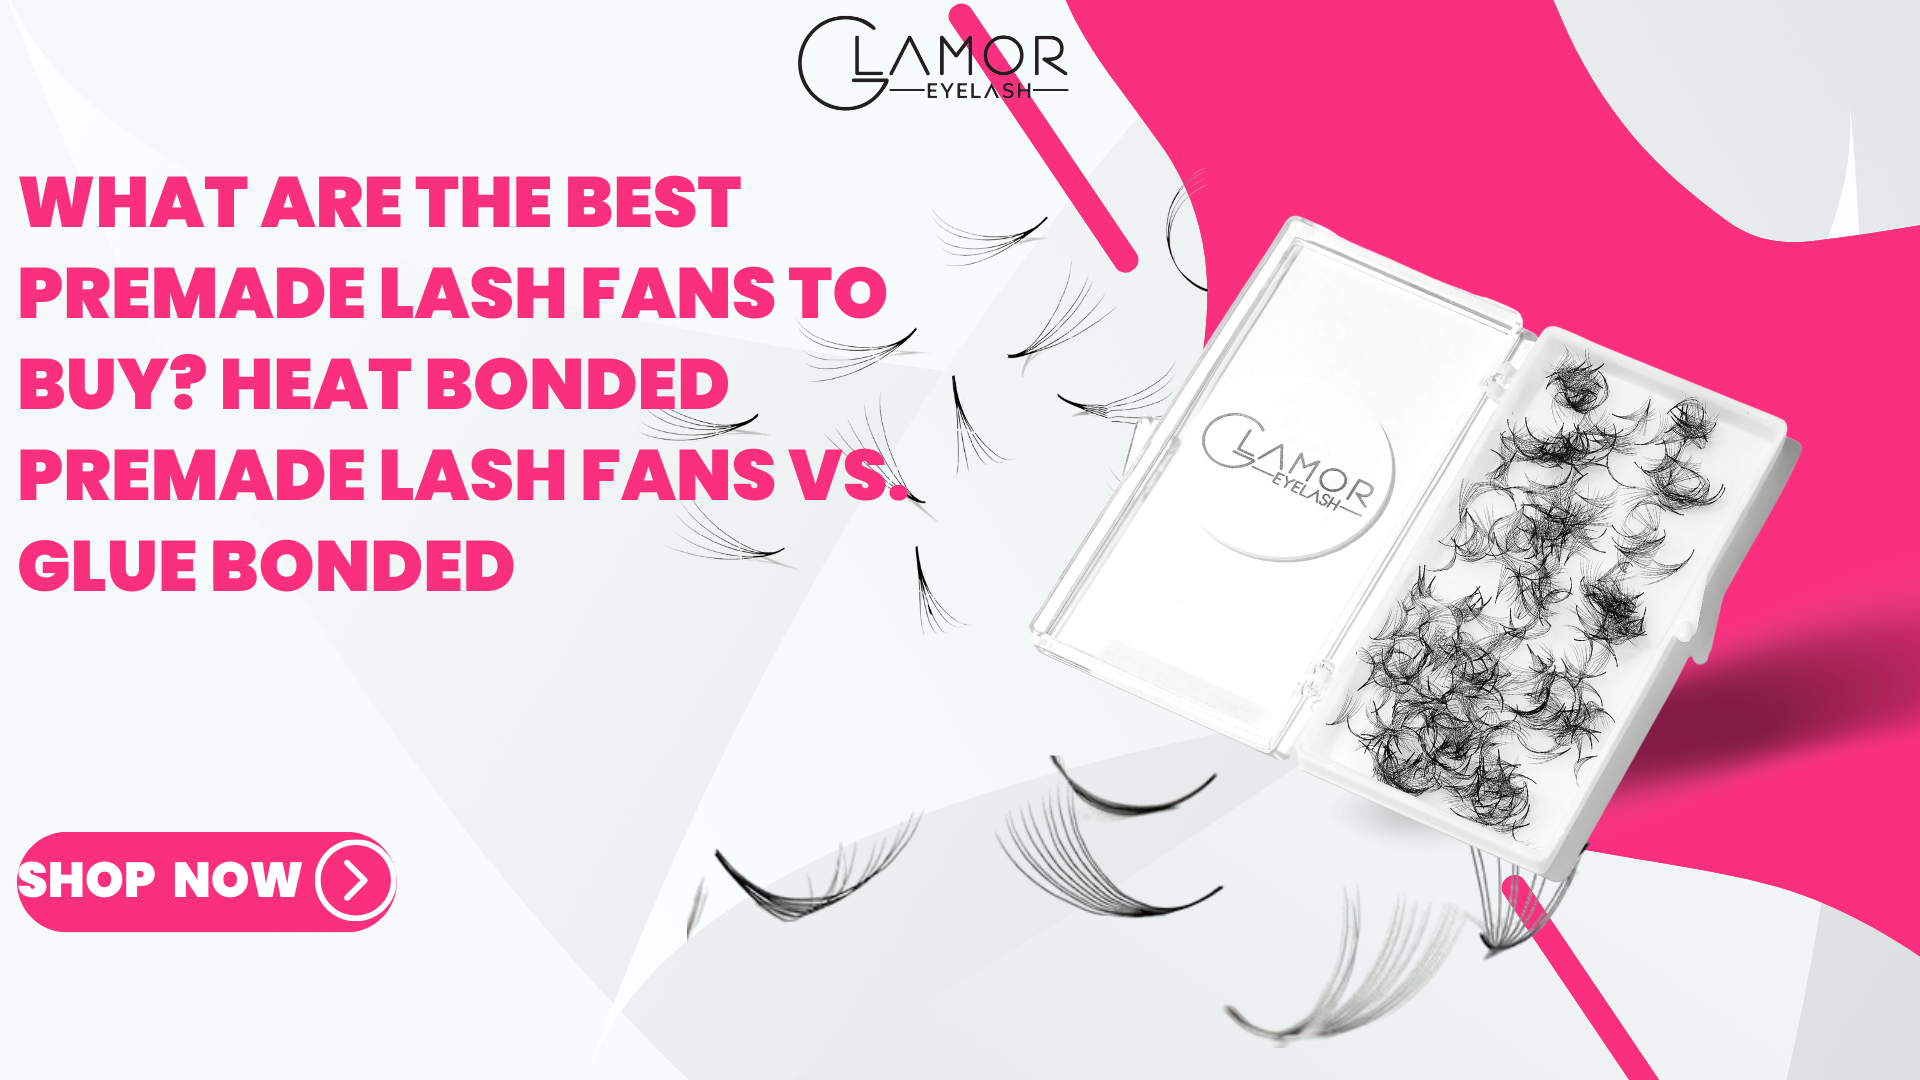 WHAT ARE THE BEST PROMADE LASH FANS TO BUY? HEAT BONDED PREMADE LASH FANS VS. GLUE BONDED